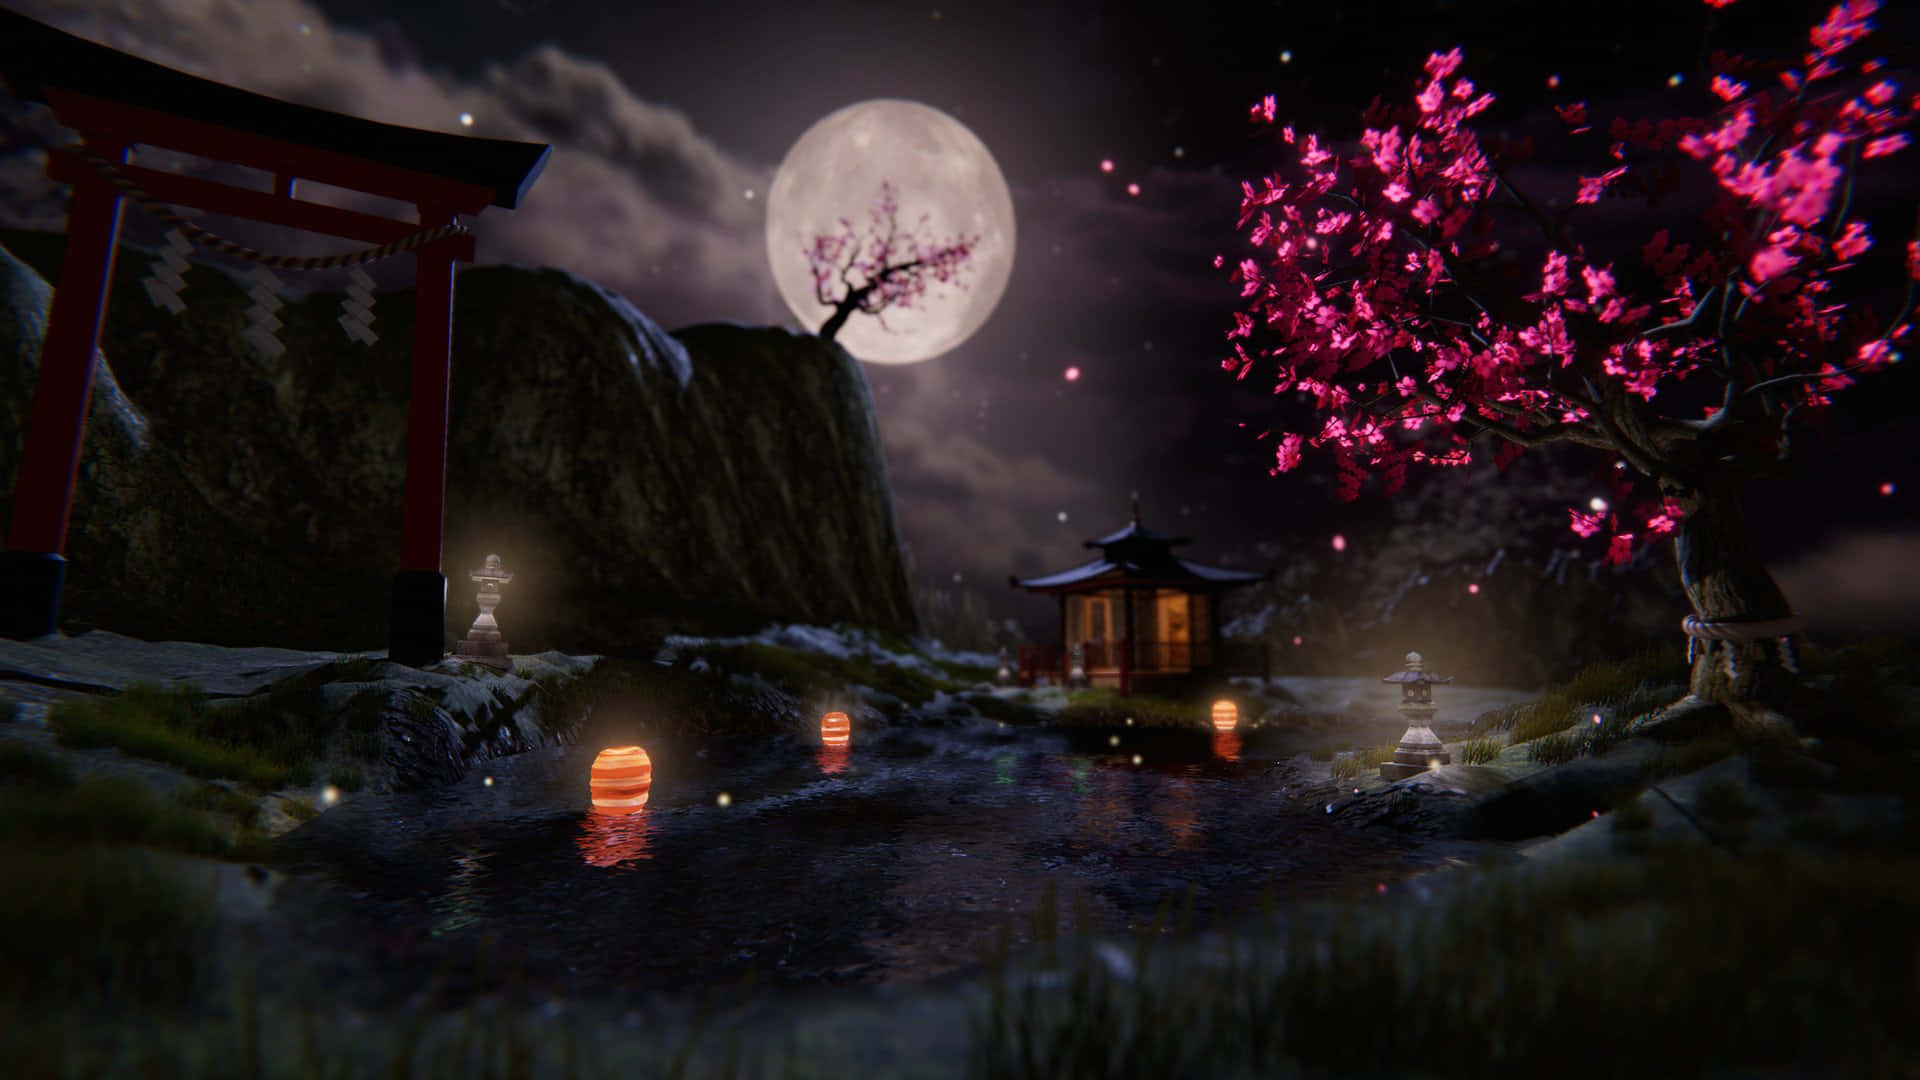 A Night Scene With A Lantern And A Moon Wallpaper